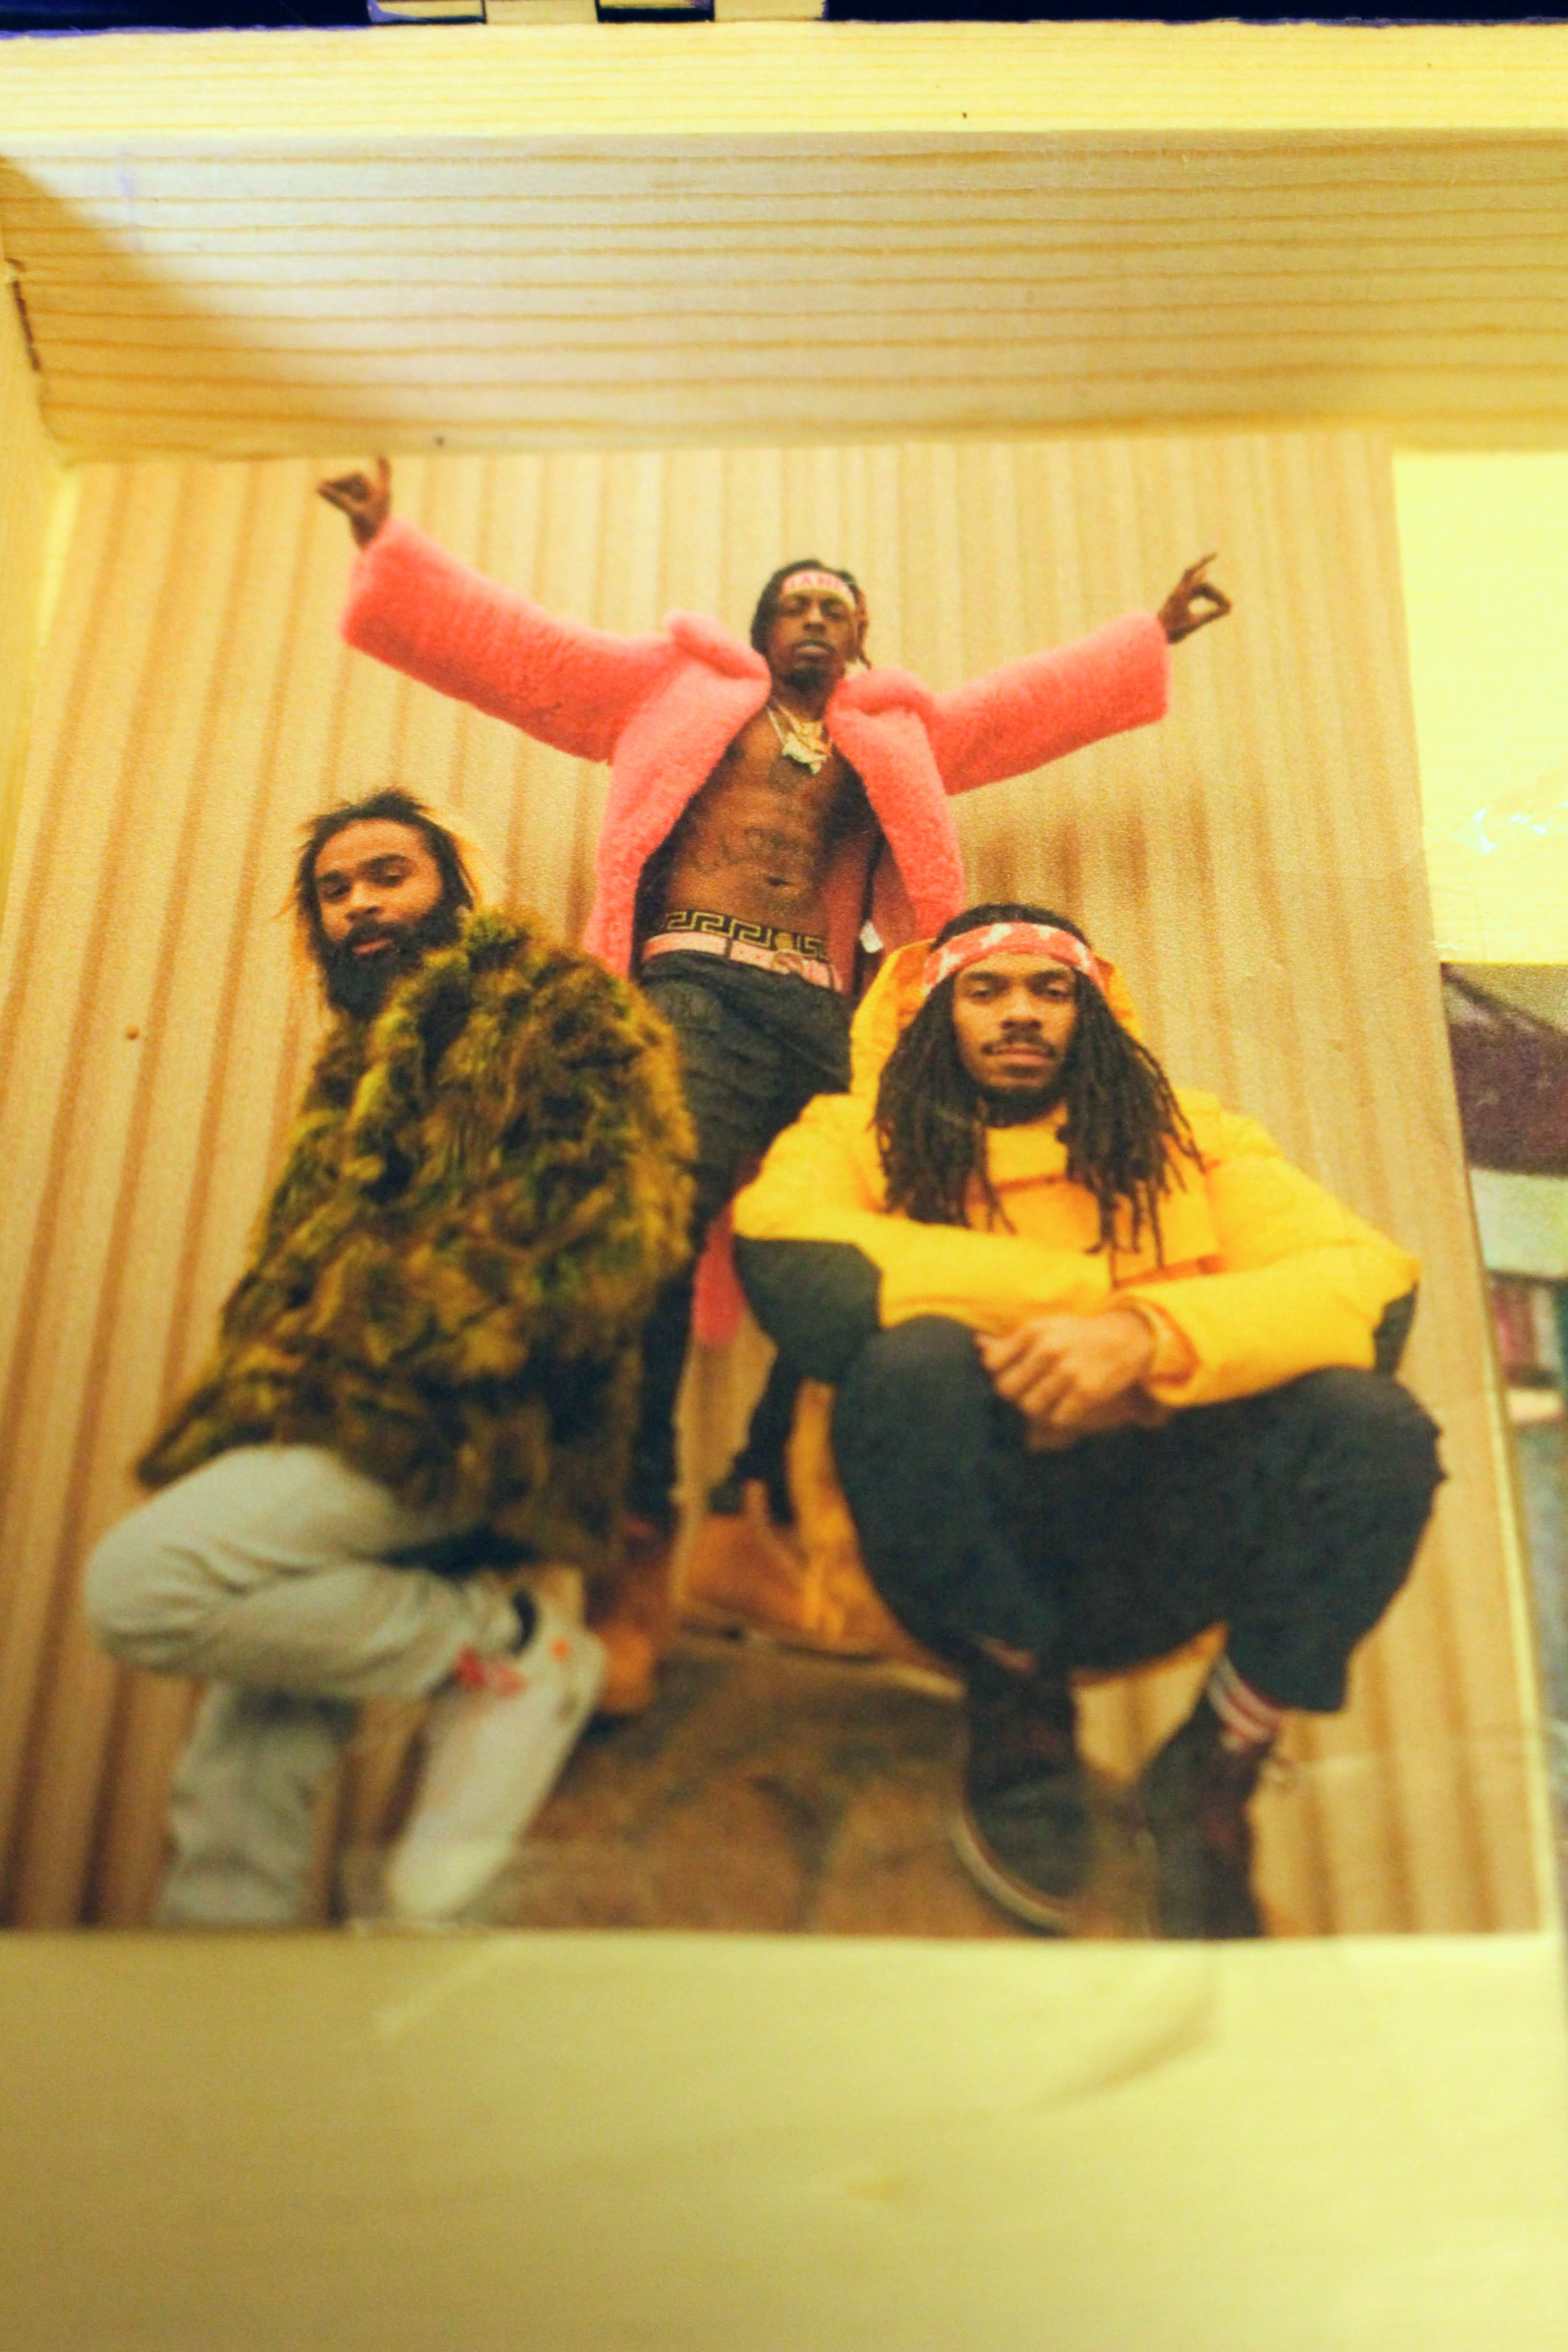 This image is of Flatbush Zombies, my favorite rap group. I included them in my teaching module and in the kit to show how other cultures, aside from Black-American culture can influence rap music. Particularly Caribbean culture where both the founders of hip hop and the Flatbush Zombies derive from